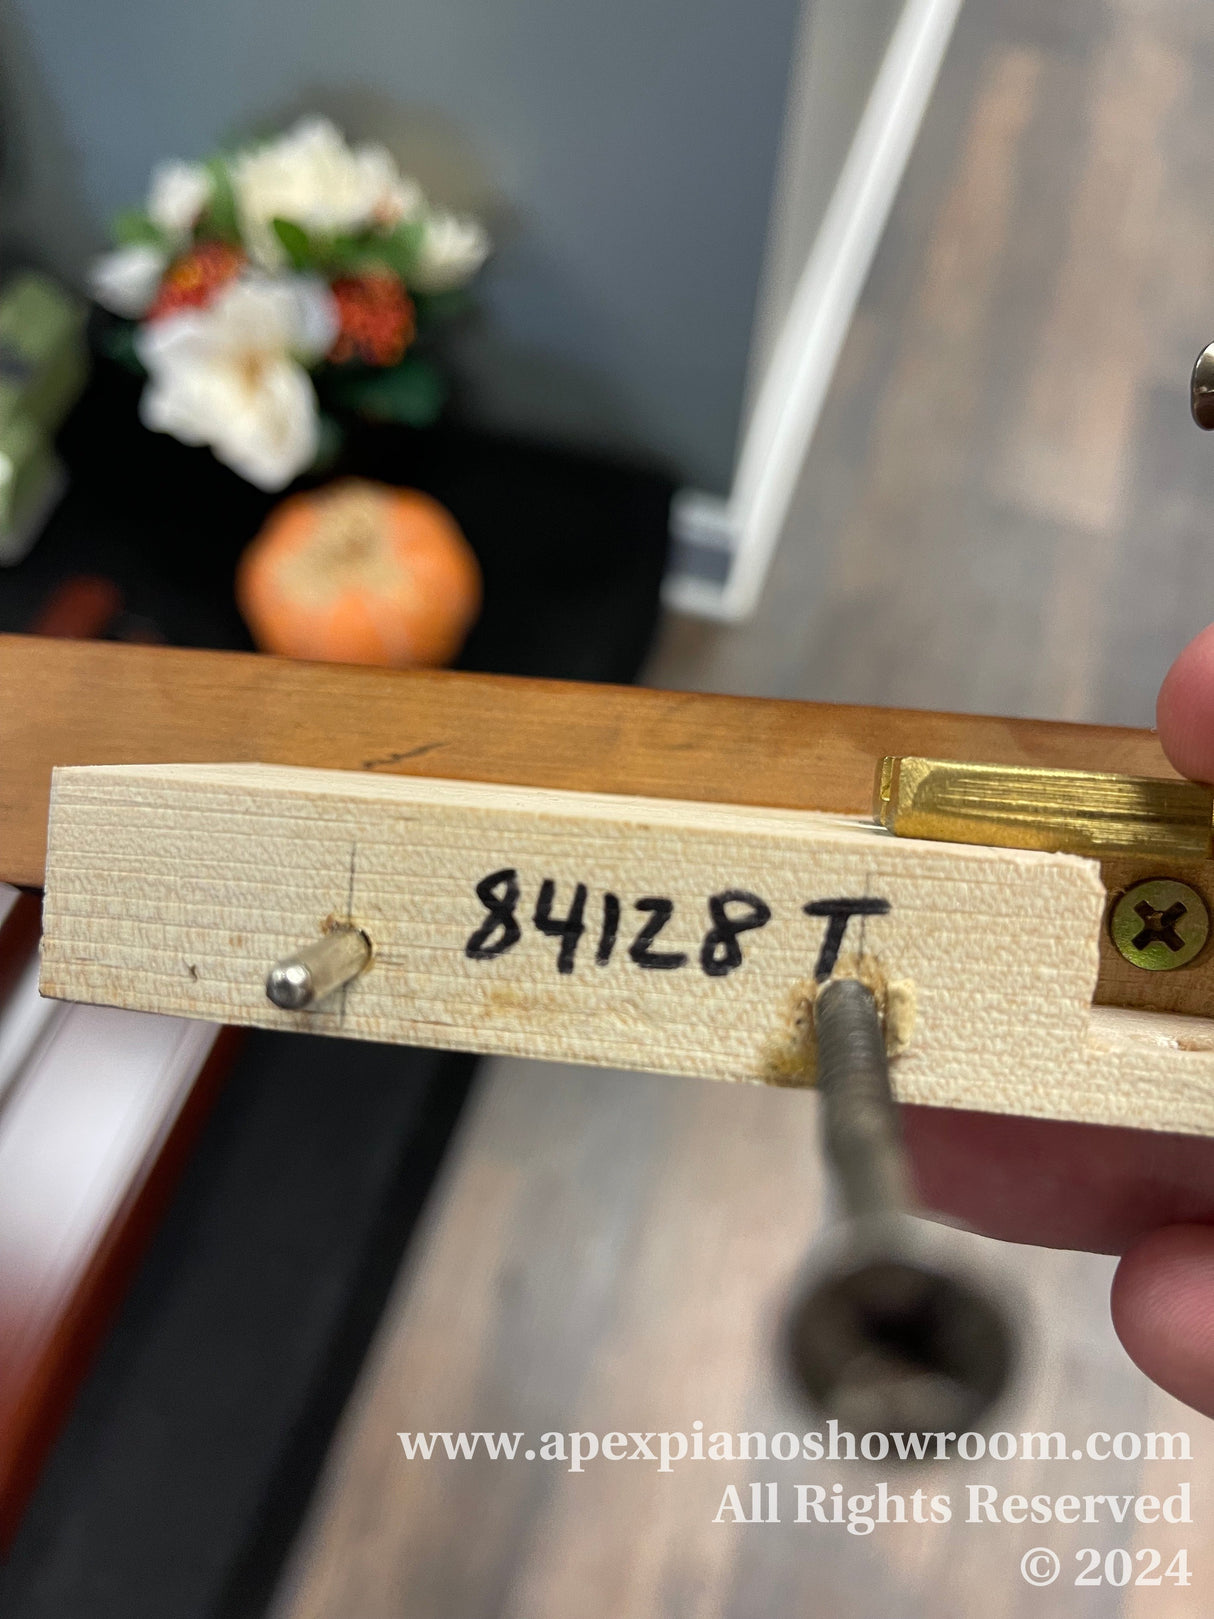 Close-up of a piano part with a serial number 84128T written on it, a tuning pin being inserted, and a blurry background featuring flowers and an orange object.